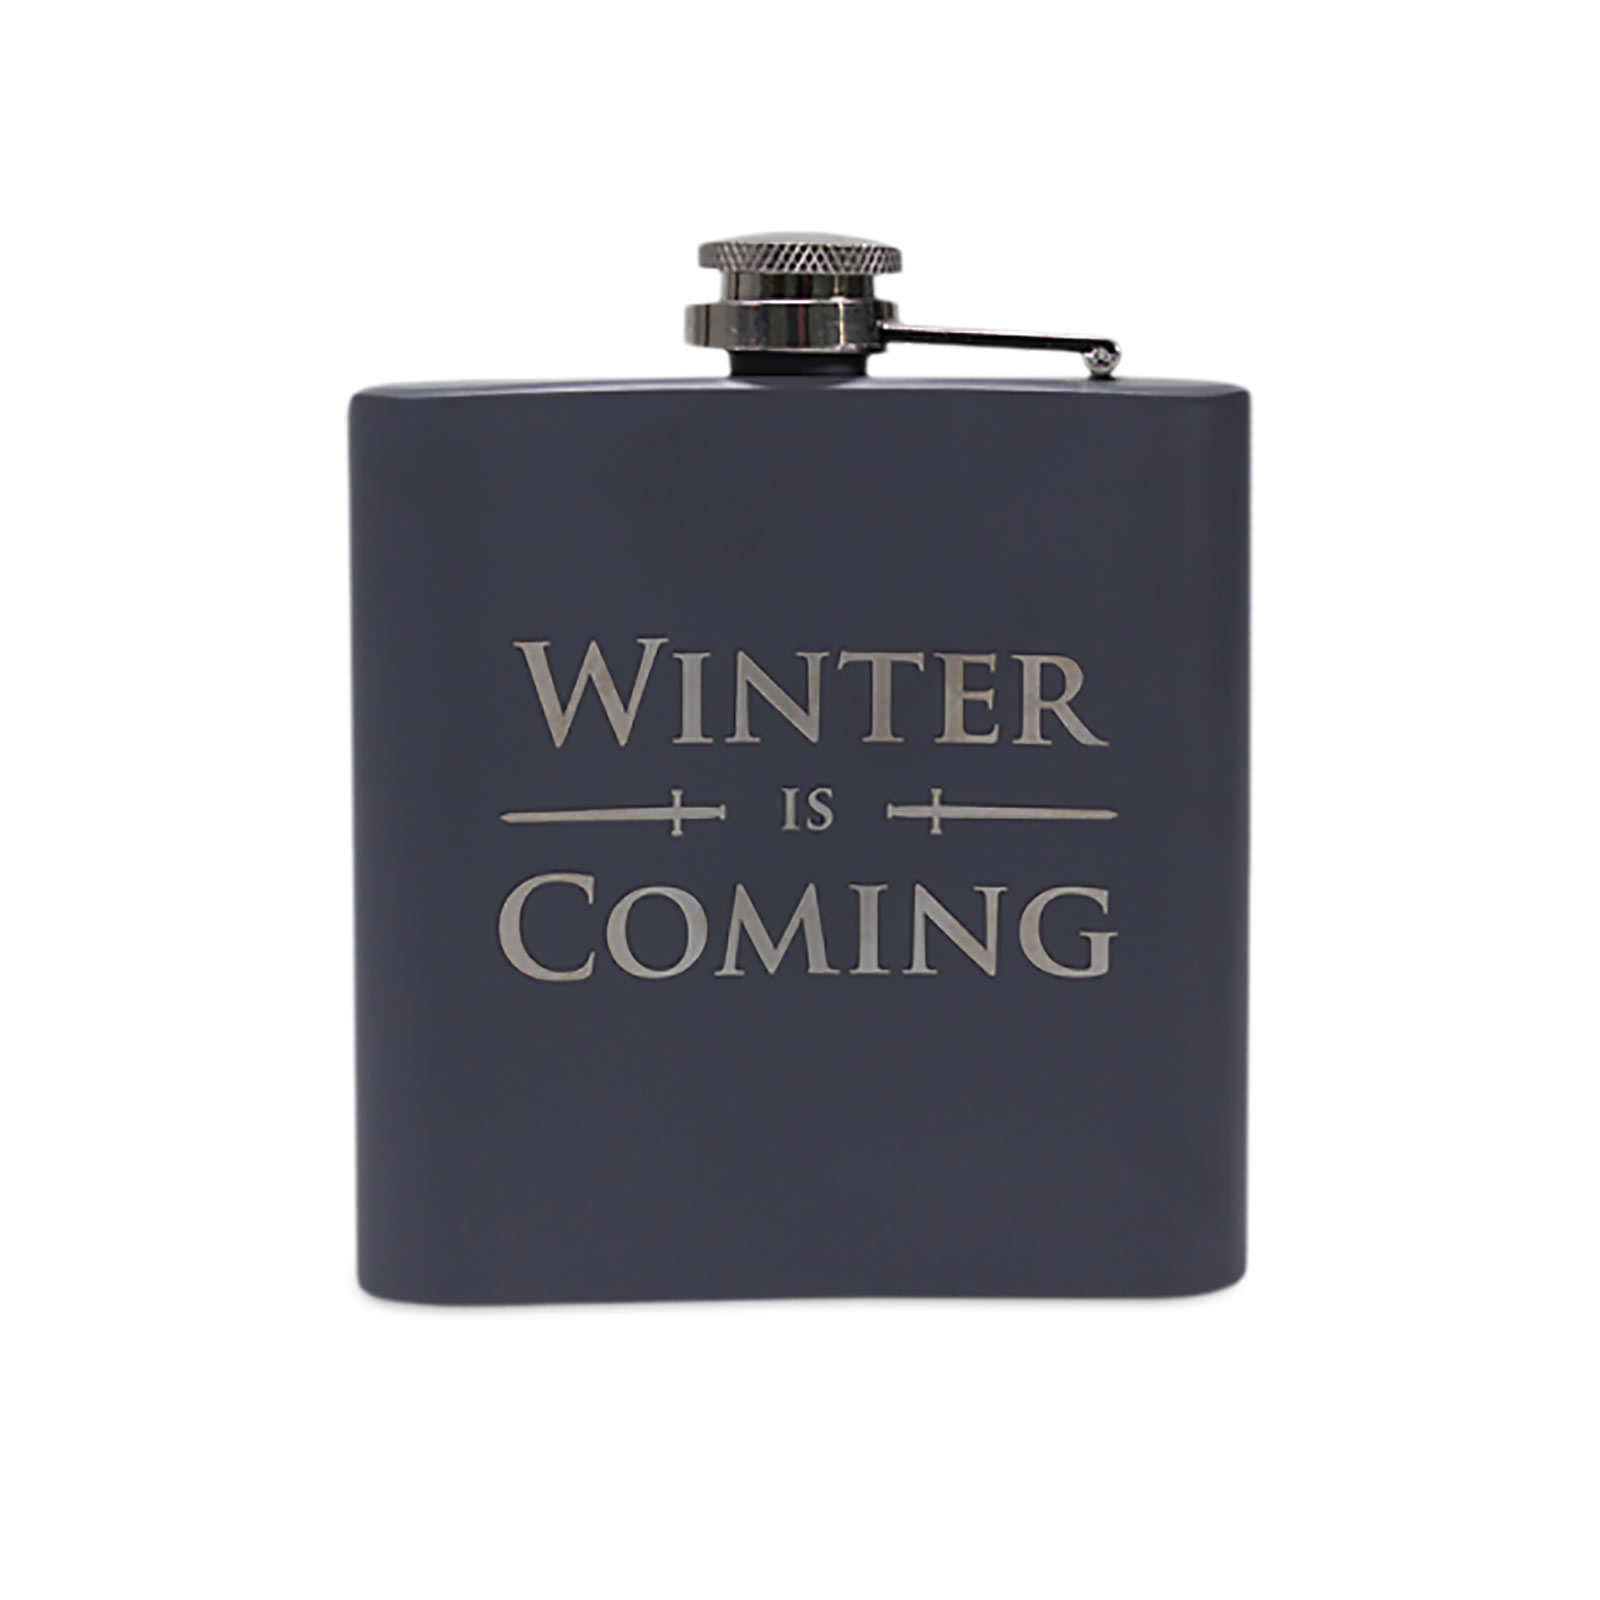 Game of Thrones - Stark L'hiver arrive Flasque